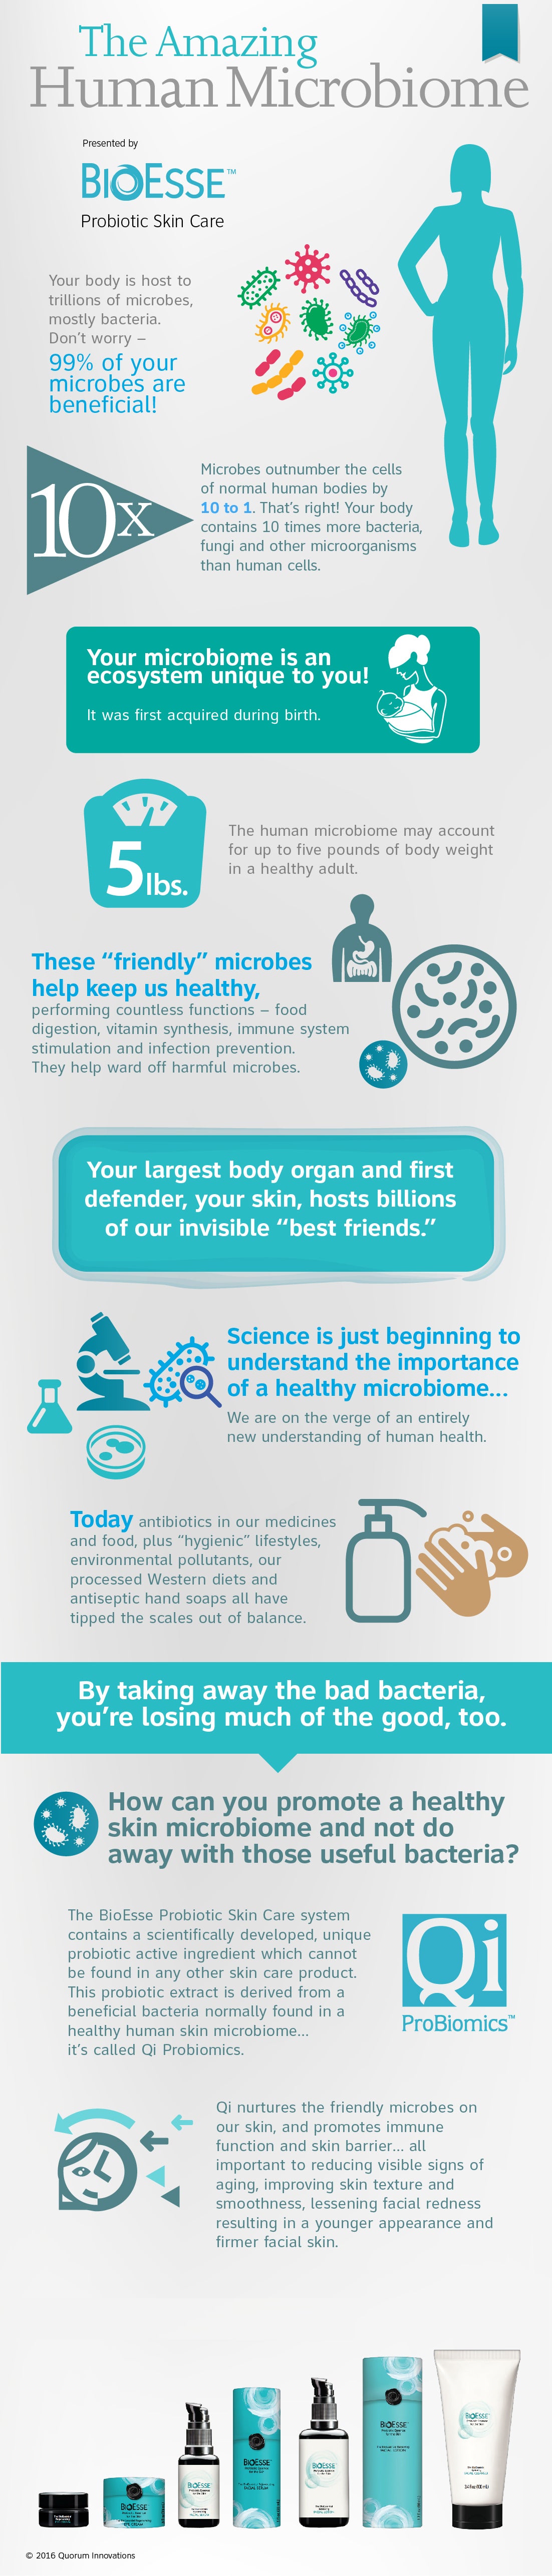 Your Skins Microbiome Infographic